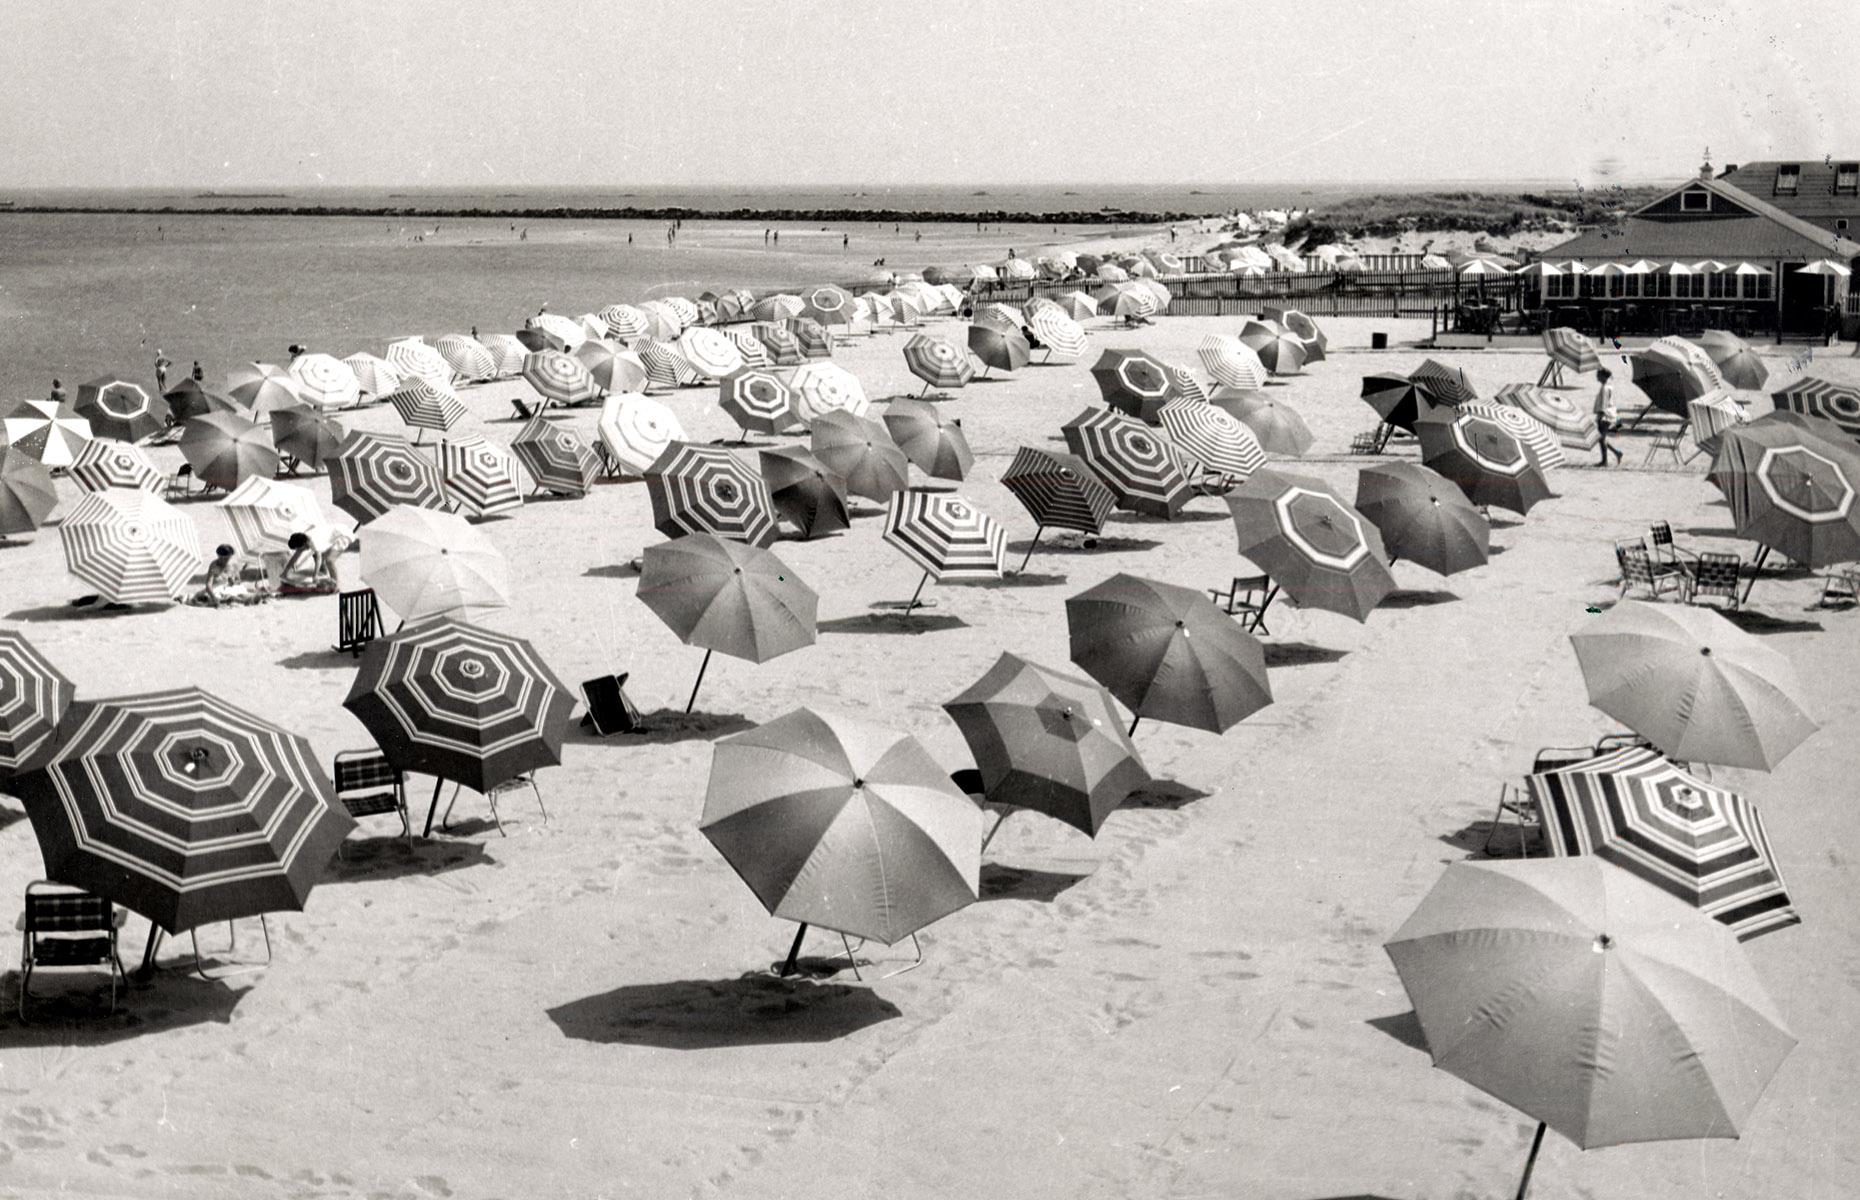 Some three decades later, in the 1950s, Cape Cod's popularity with vacationers showed no sign of waning. This sandy, umbrella-carpeted beach is actually on Nantucket, a dinky island that lies just off the cape.